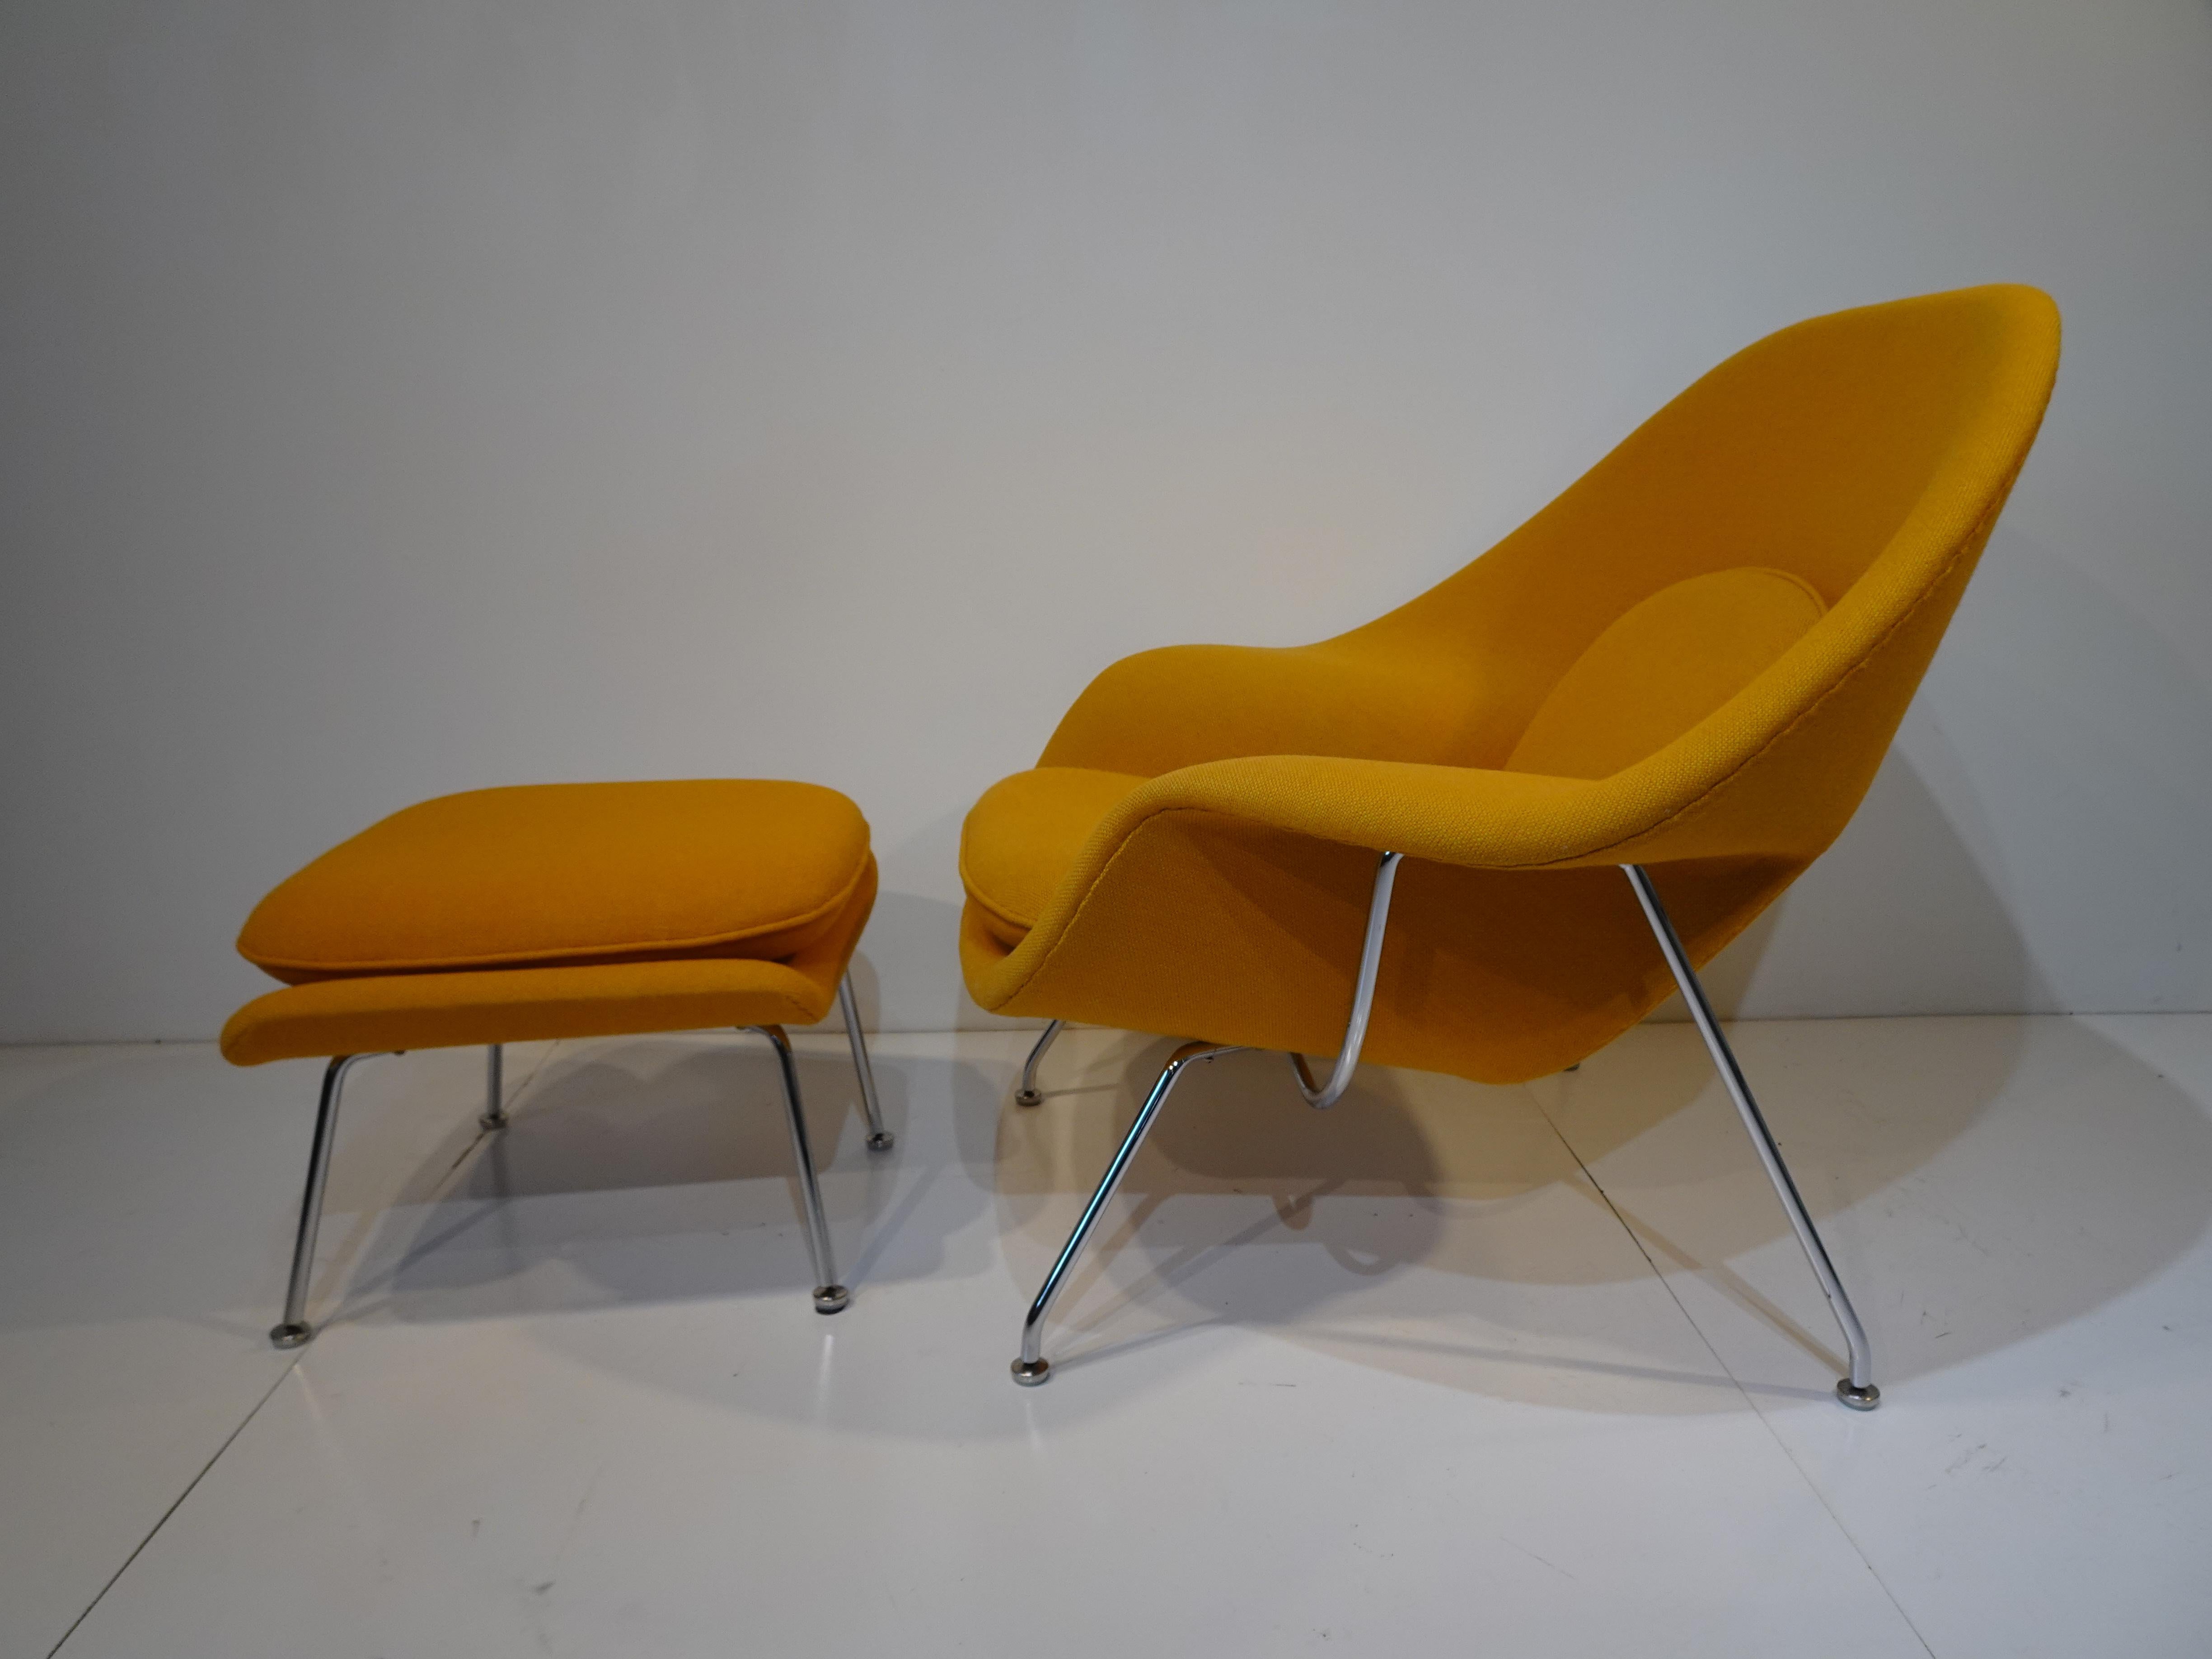 A womb chair with matching ottoman in a orange / yellow woven wool blend fabric sitting on chromed steel legs with nylon foot pads to protect your floors . This is the iconic lounge chair next to the Eames 670 from the 1960's - 70's that just sets